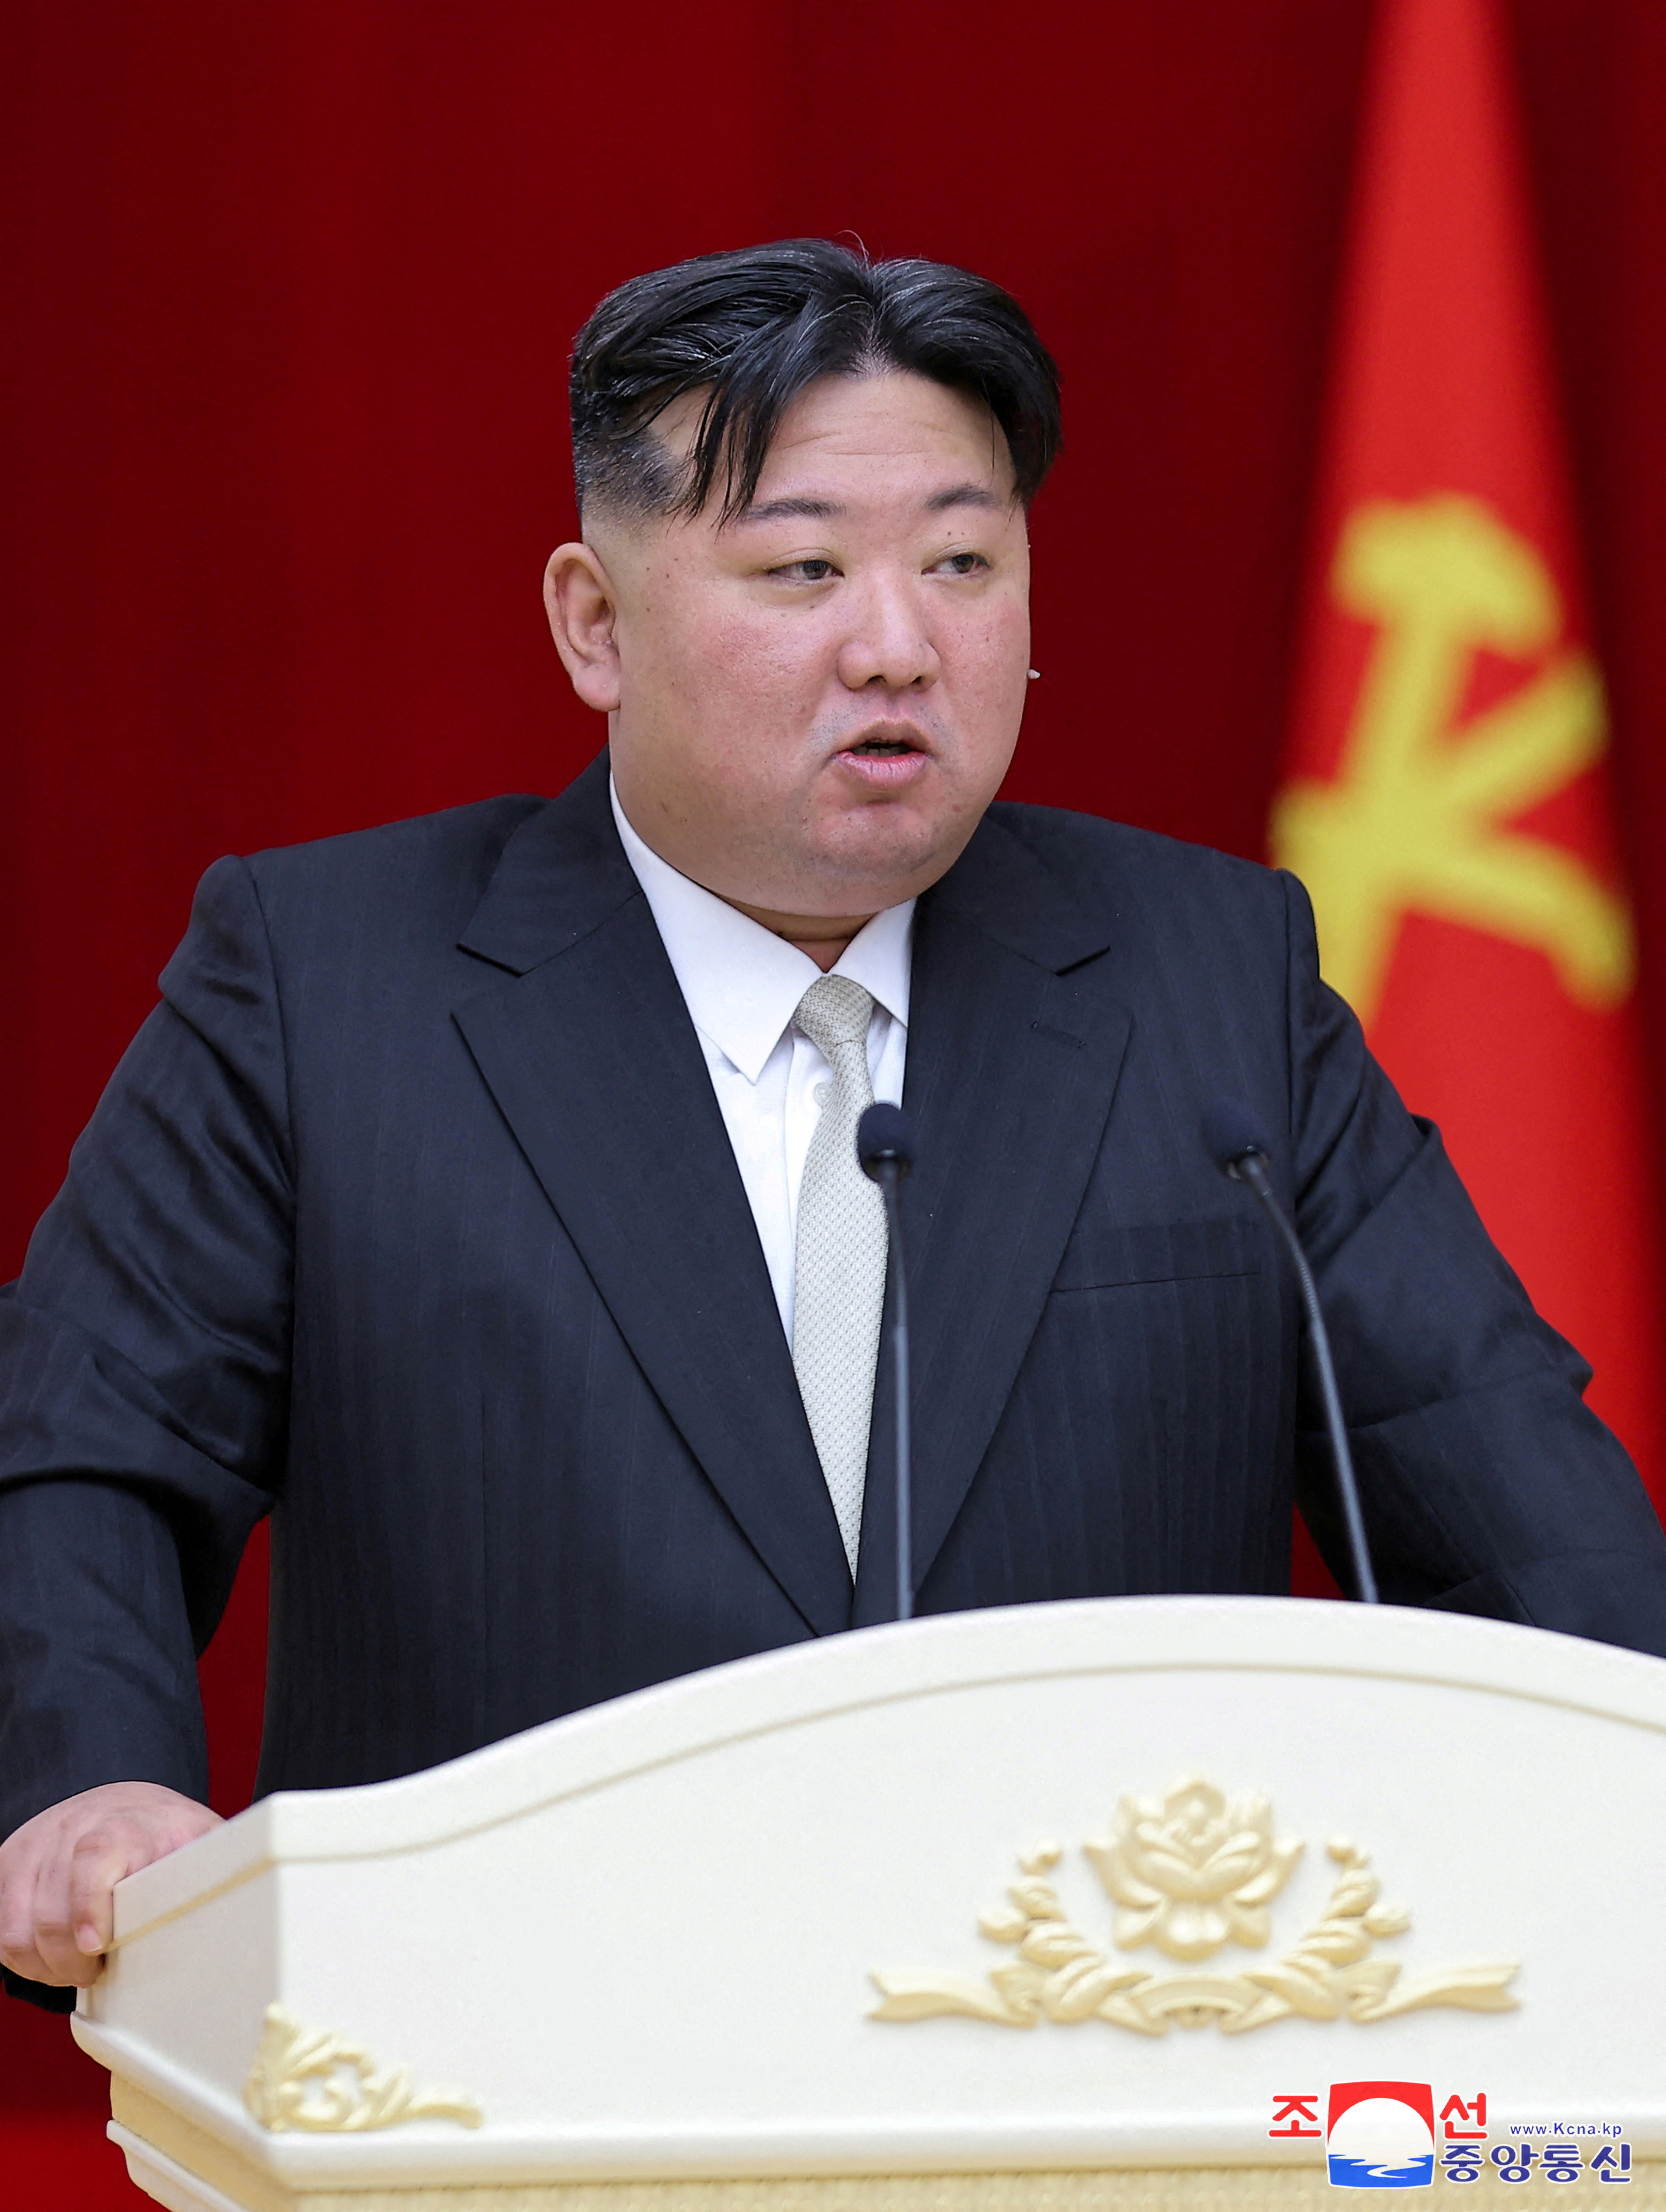 Kim Jong Un has imposed a strict ban on social media in North Korea